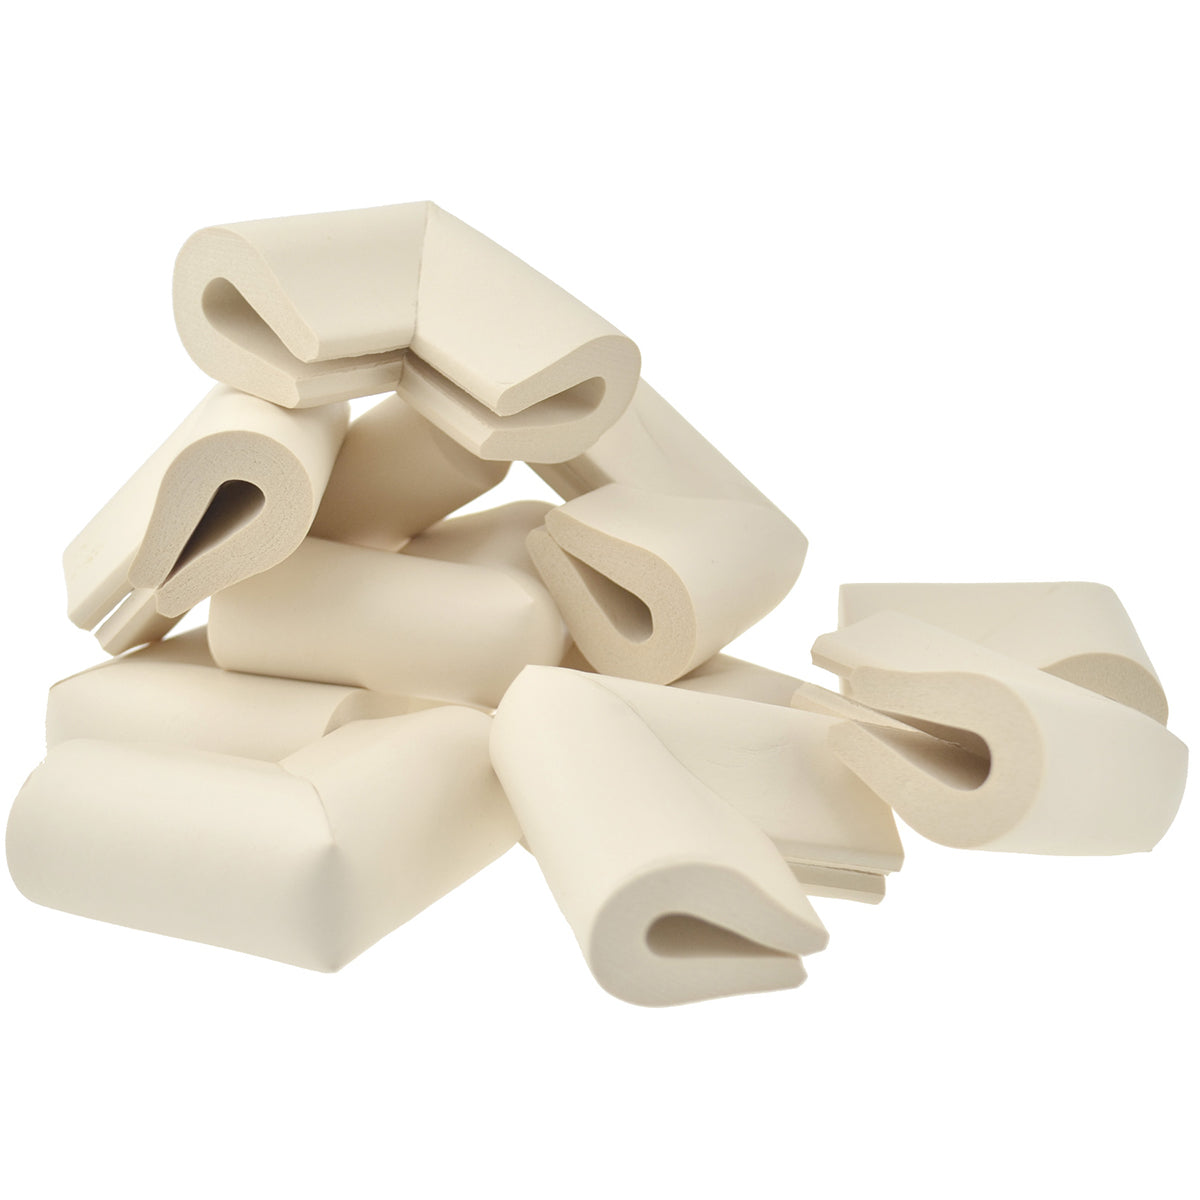 12 pieces randomly placed beige u-shaped foam corner protectors show with a white background.